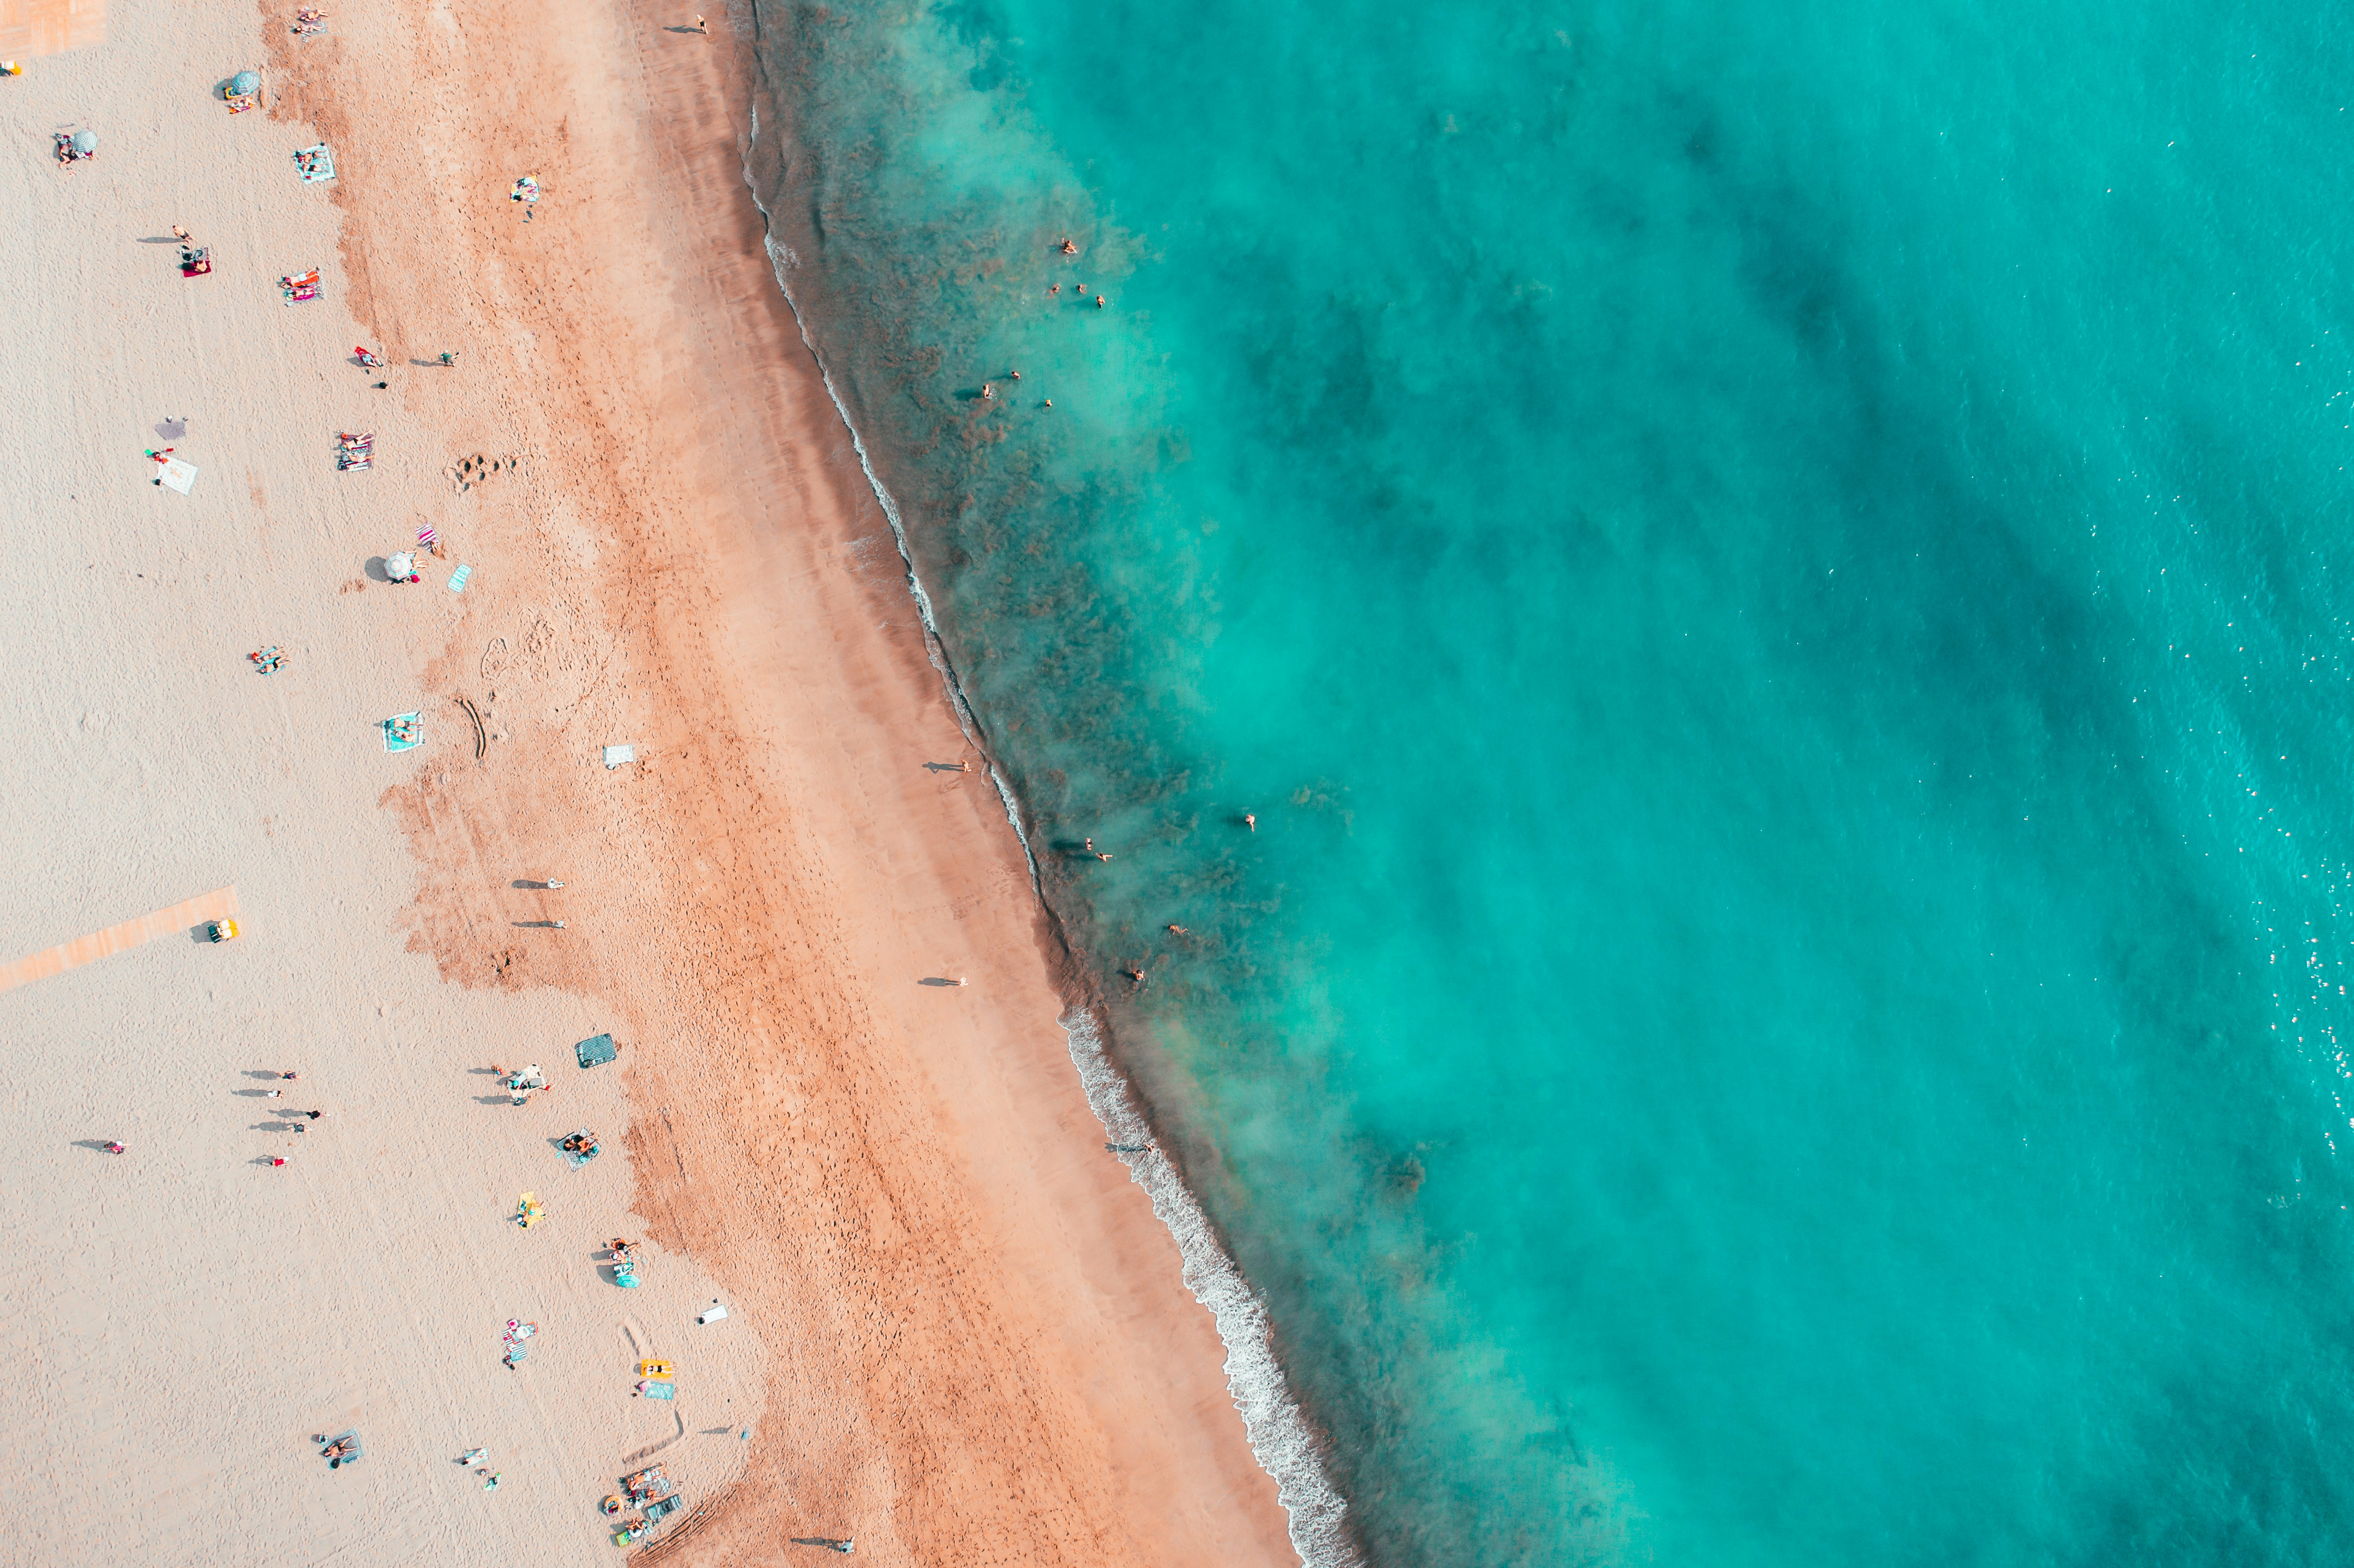 Choose from a curated selection of ocean wallpapers for your mobile and desktop screens. Always free on Unsplash.